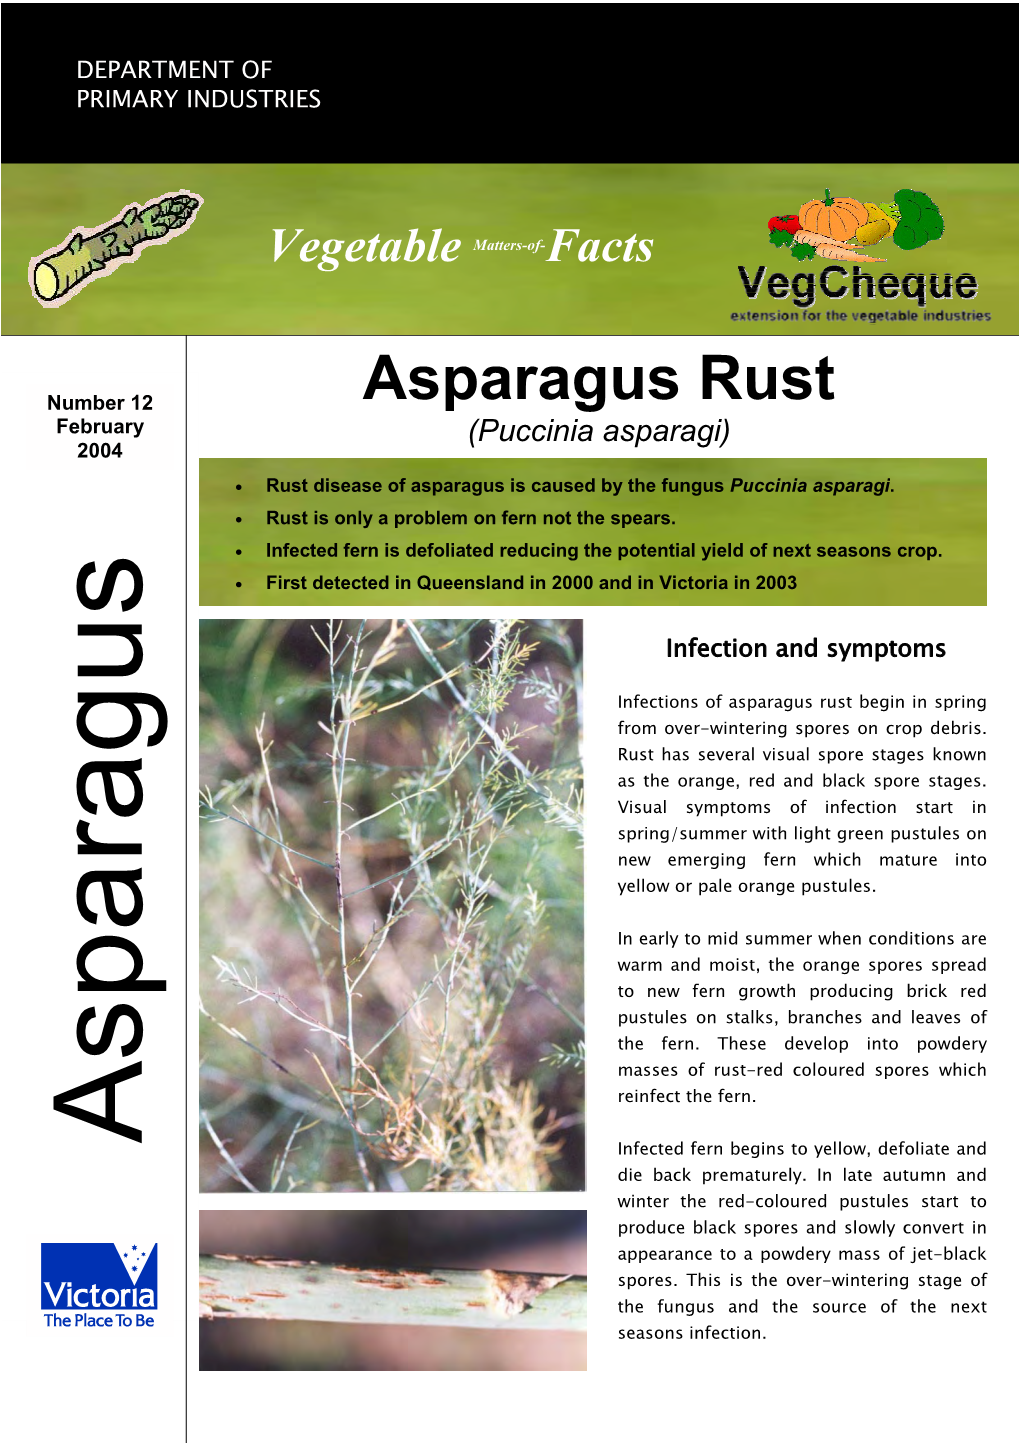 Asparagus Rust (Puccinia Asparagi) (Puccinia Matters-Of- Facts Seasons Infection